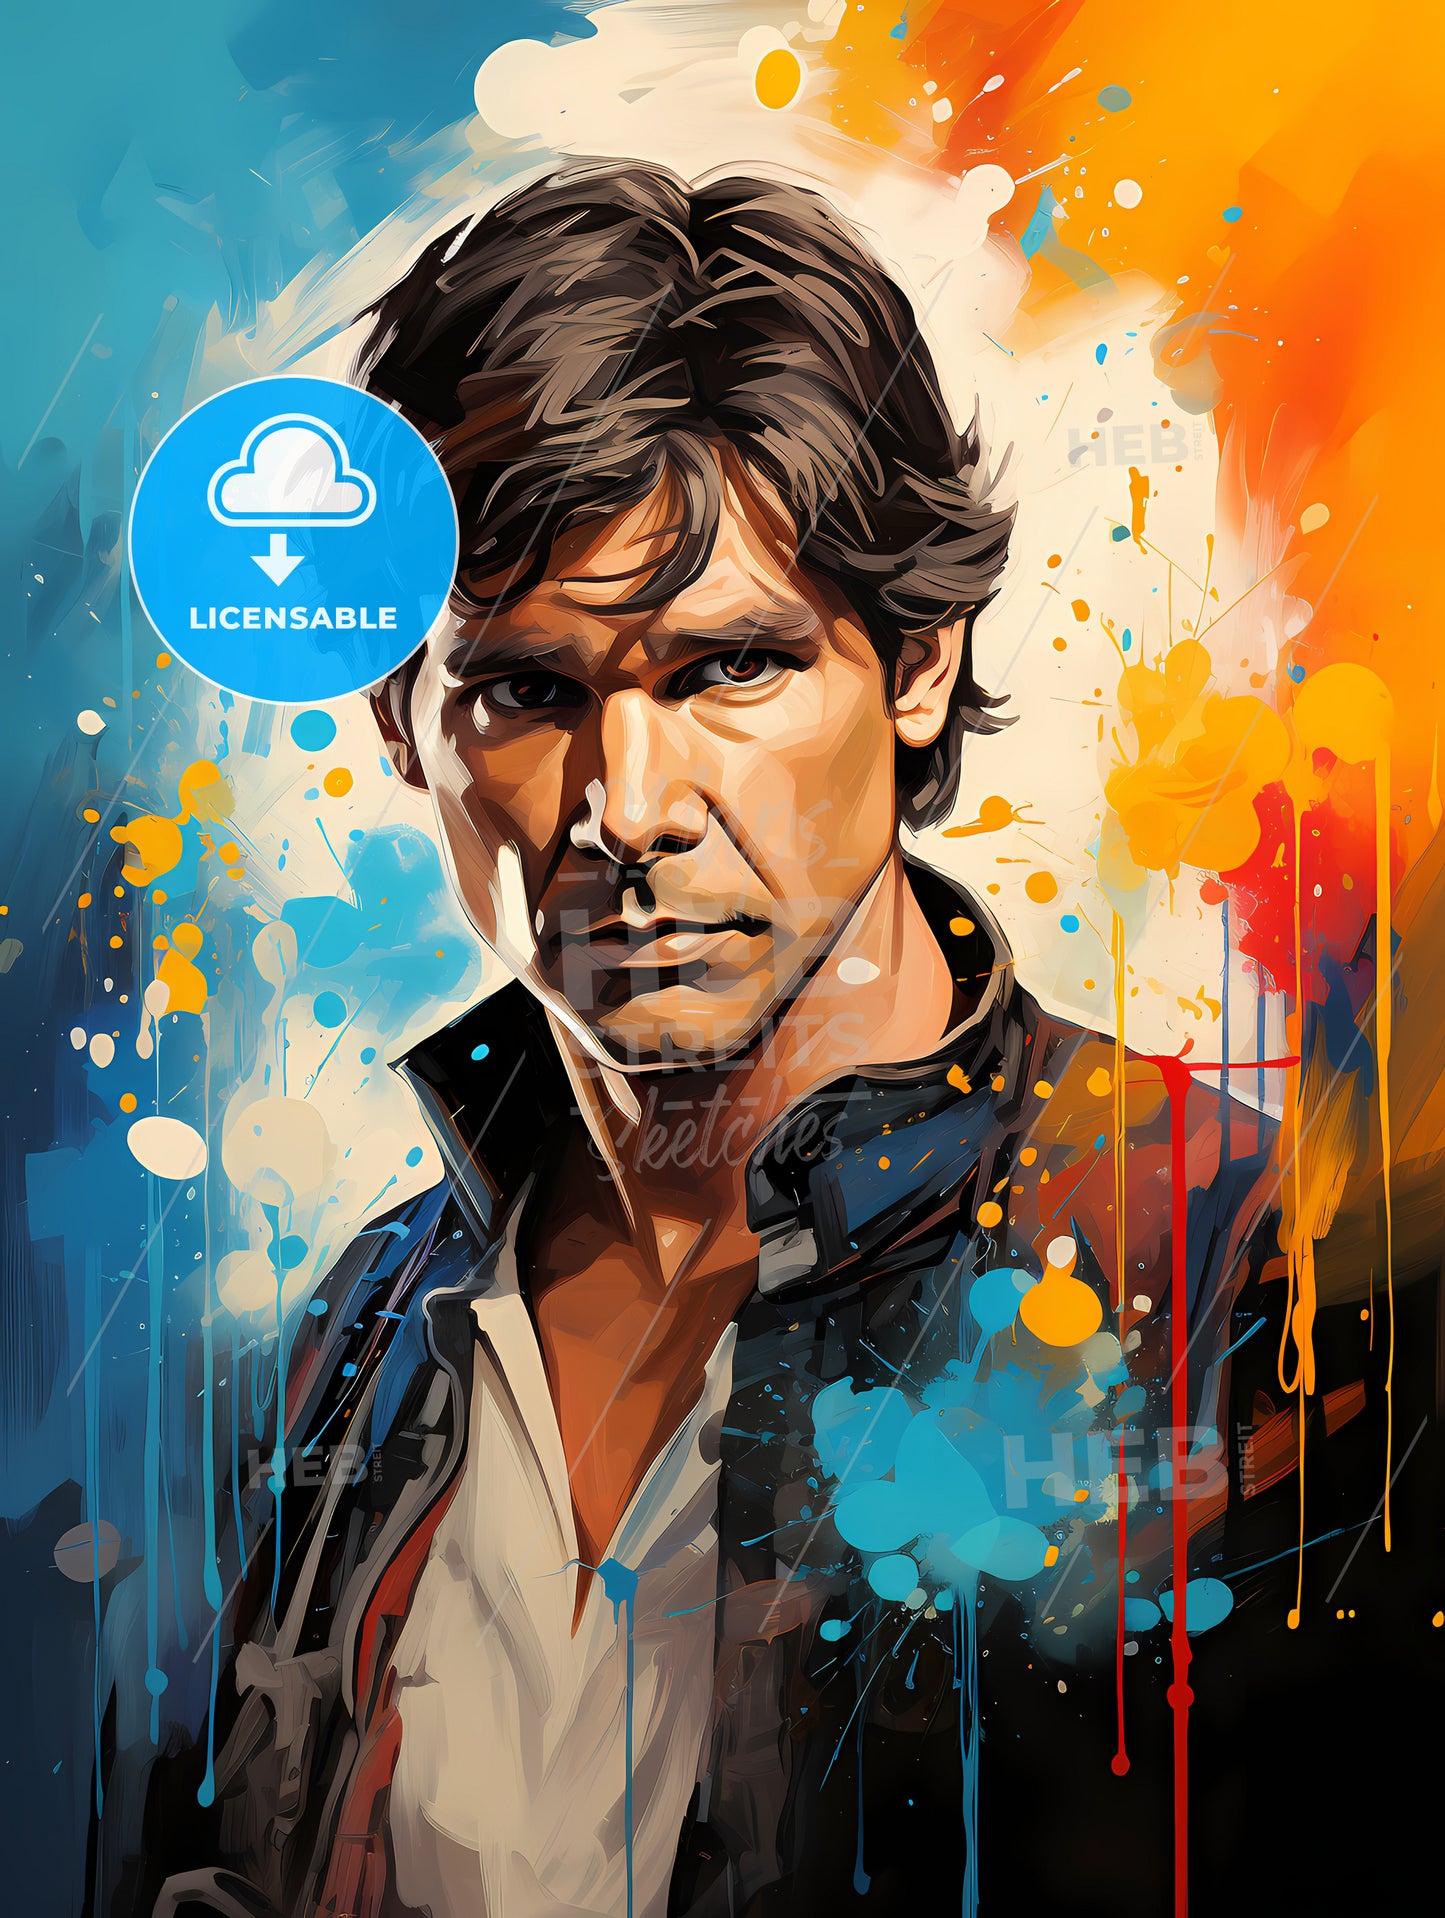 Han Solo - A Man With A Serious Face